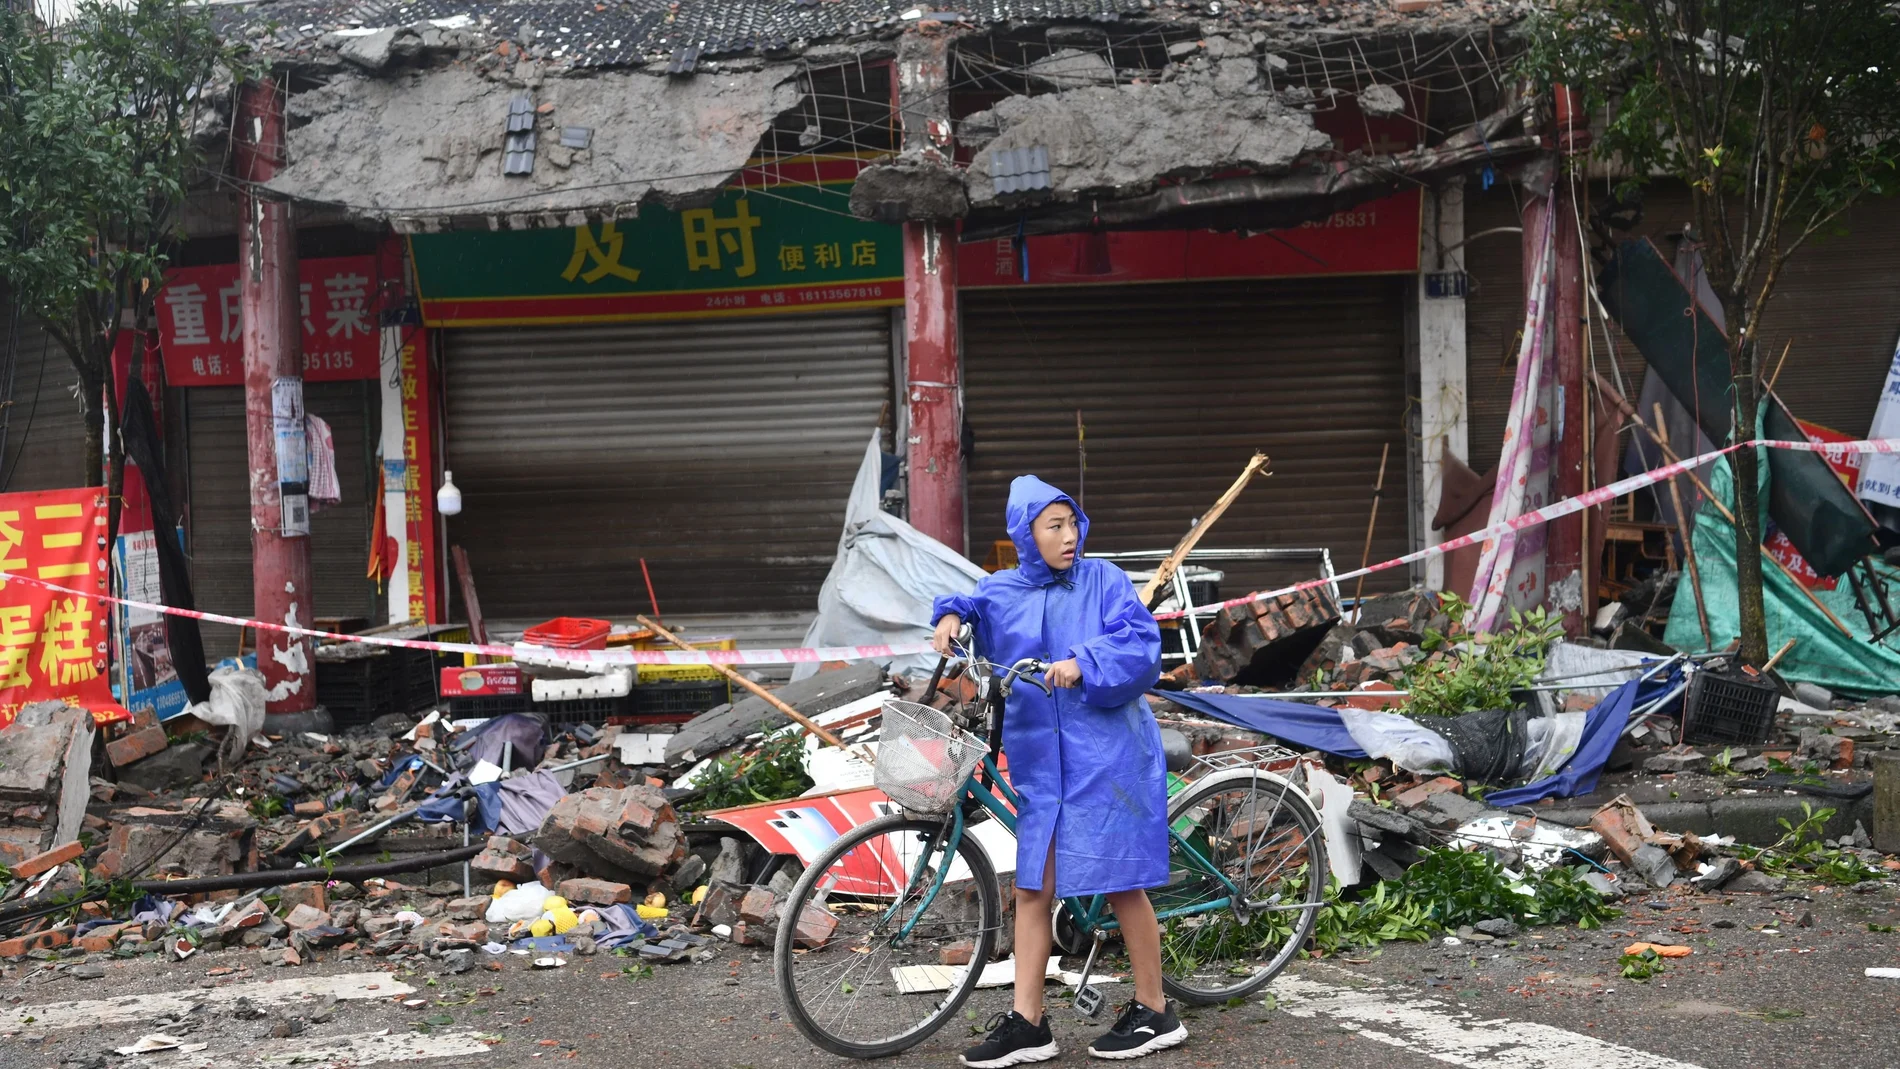 A person pushes a bicycle past damaged buildings, following an earthquake in Luzhou city of southwestern province of Sichuan, China September 16, 2021. cnsphoto/via REUTERS ATTENTION EDITORS - THIS IMAGE WAS PROVIDED BY A THIRD PARTY. CHINA OUT.